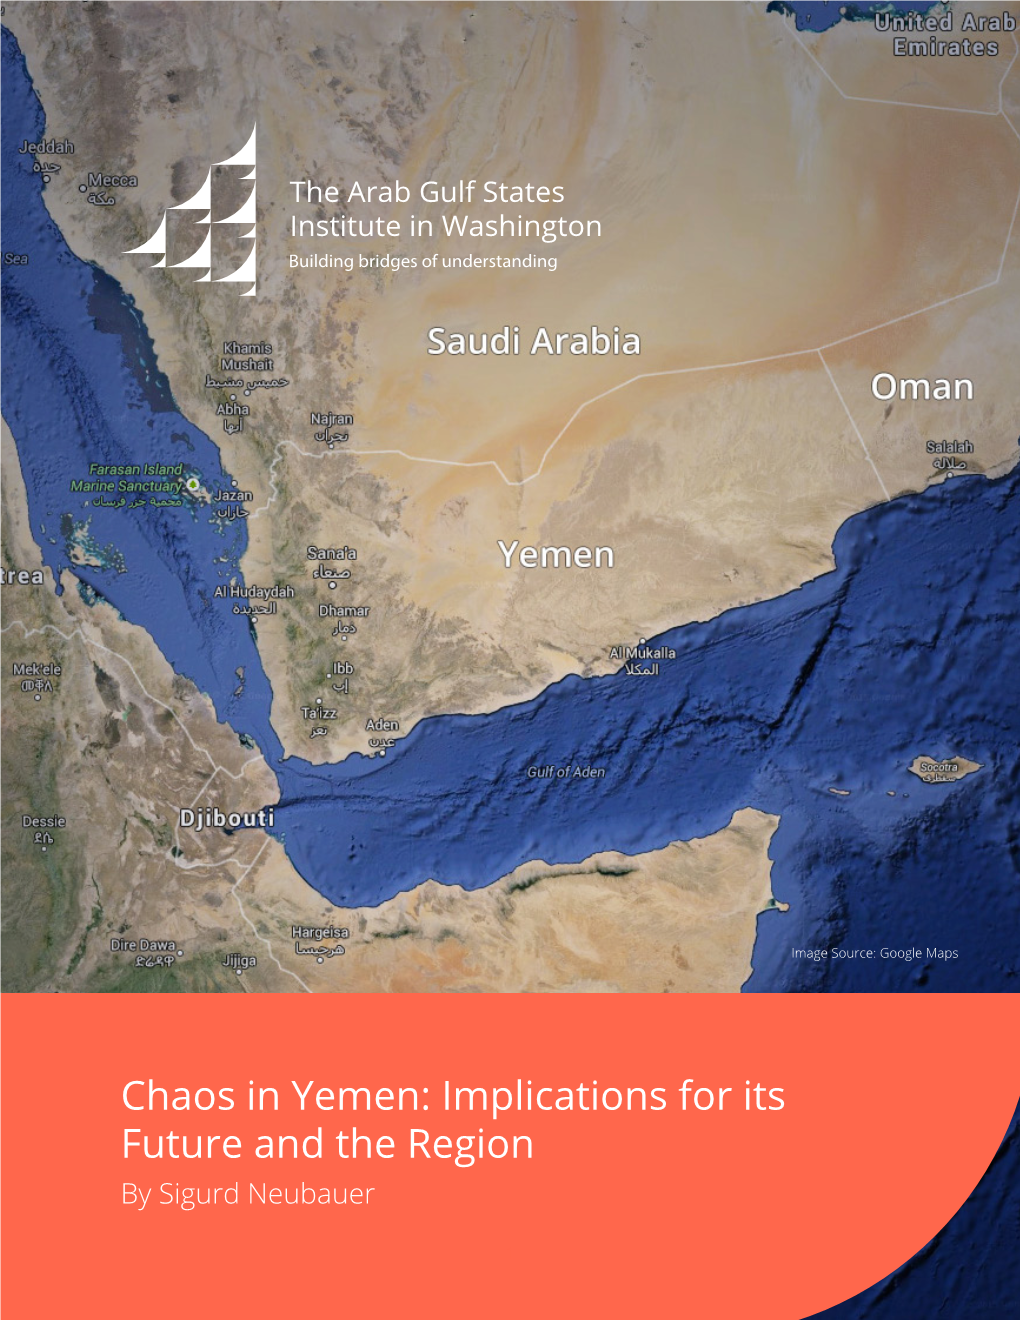 Chaos in Yemen: Implications for Its Future and the Region by Sigurd Neubauer